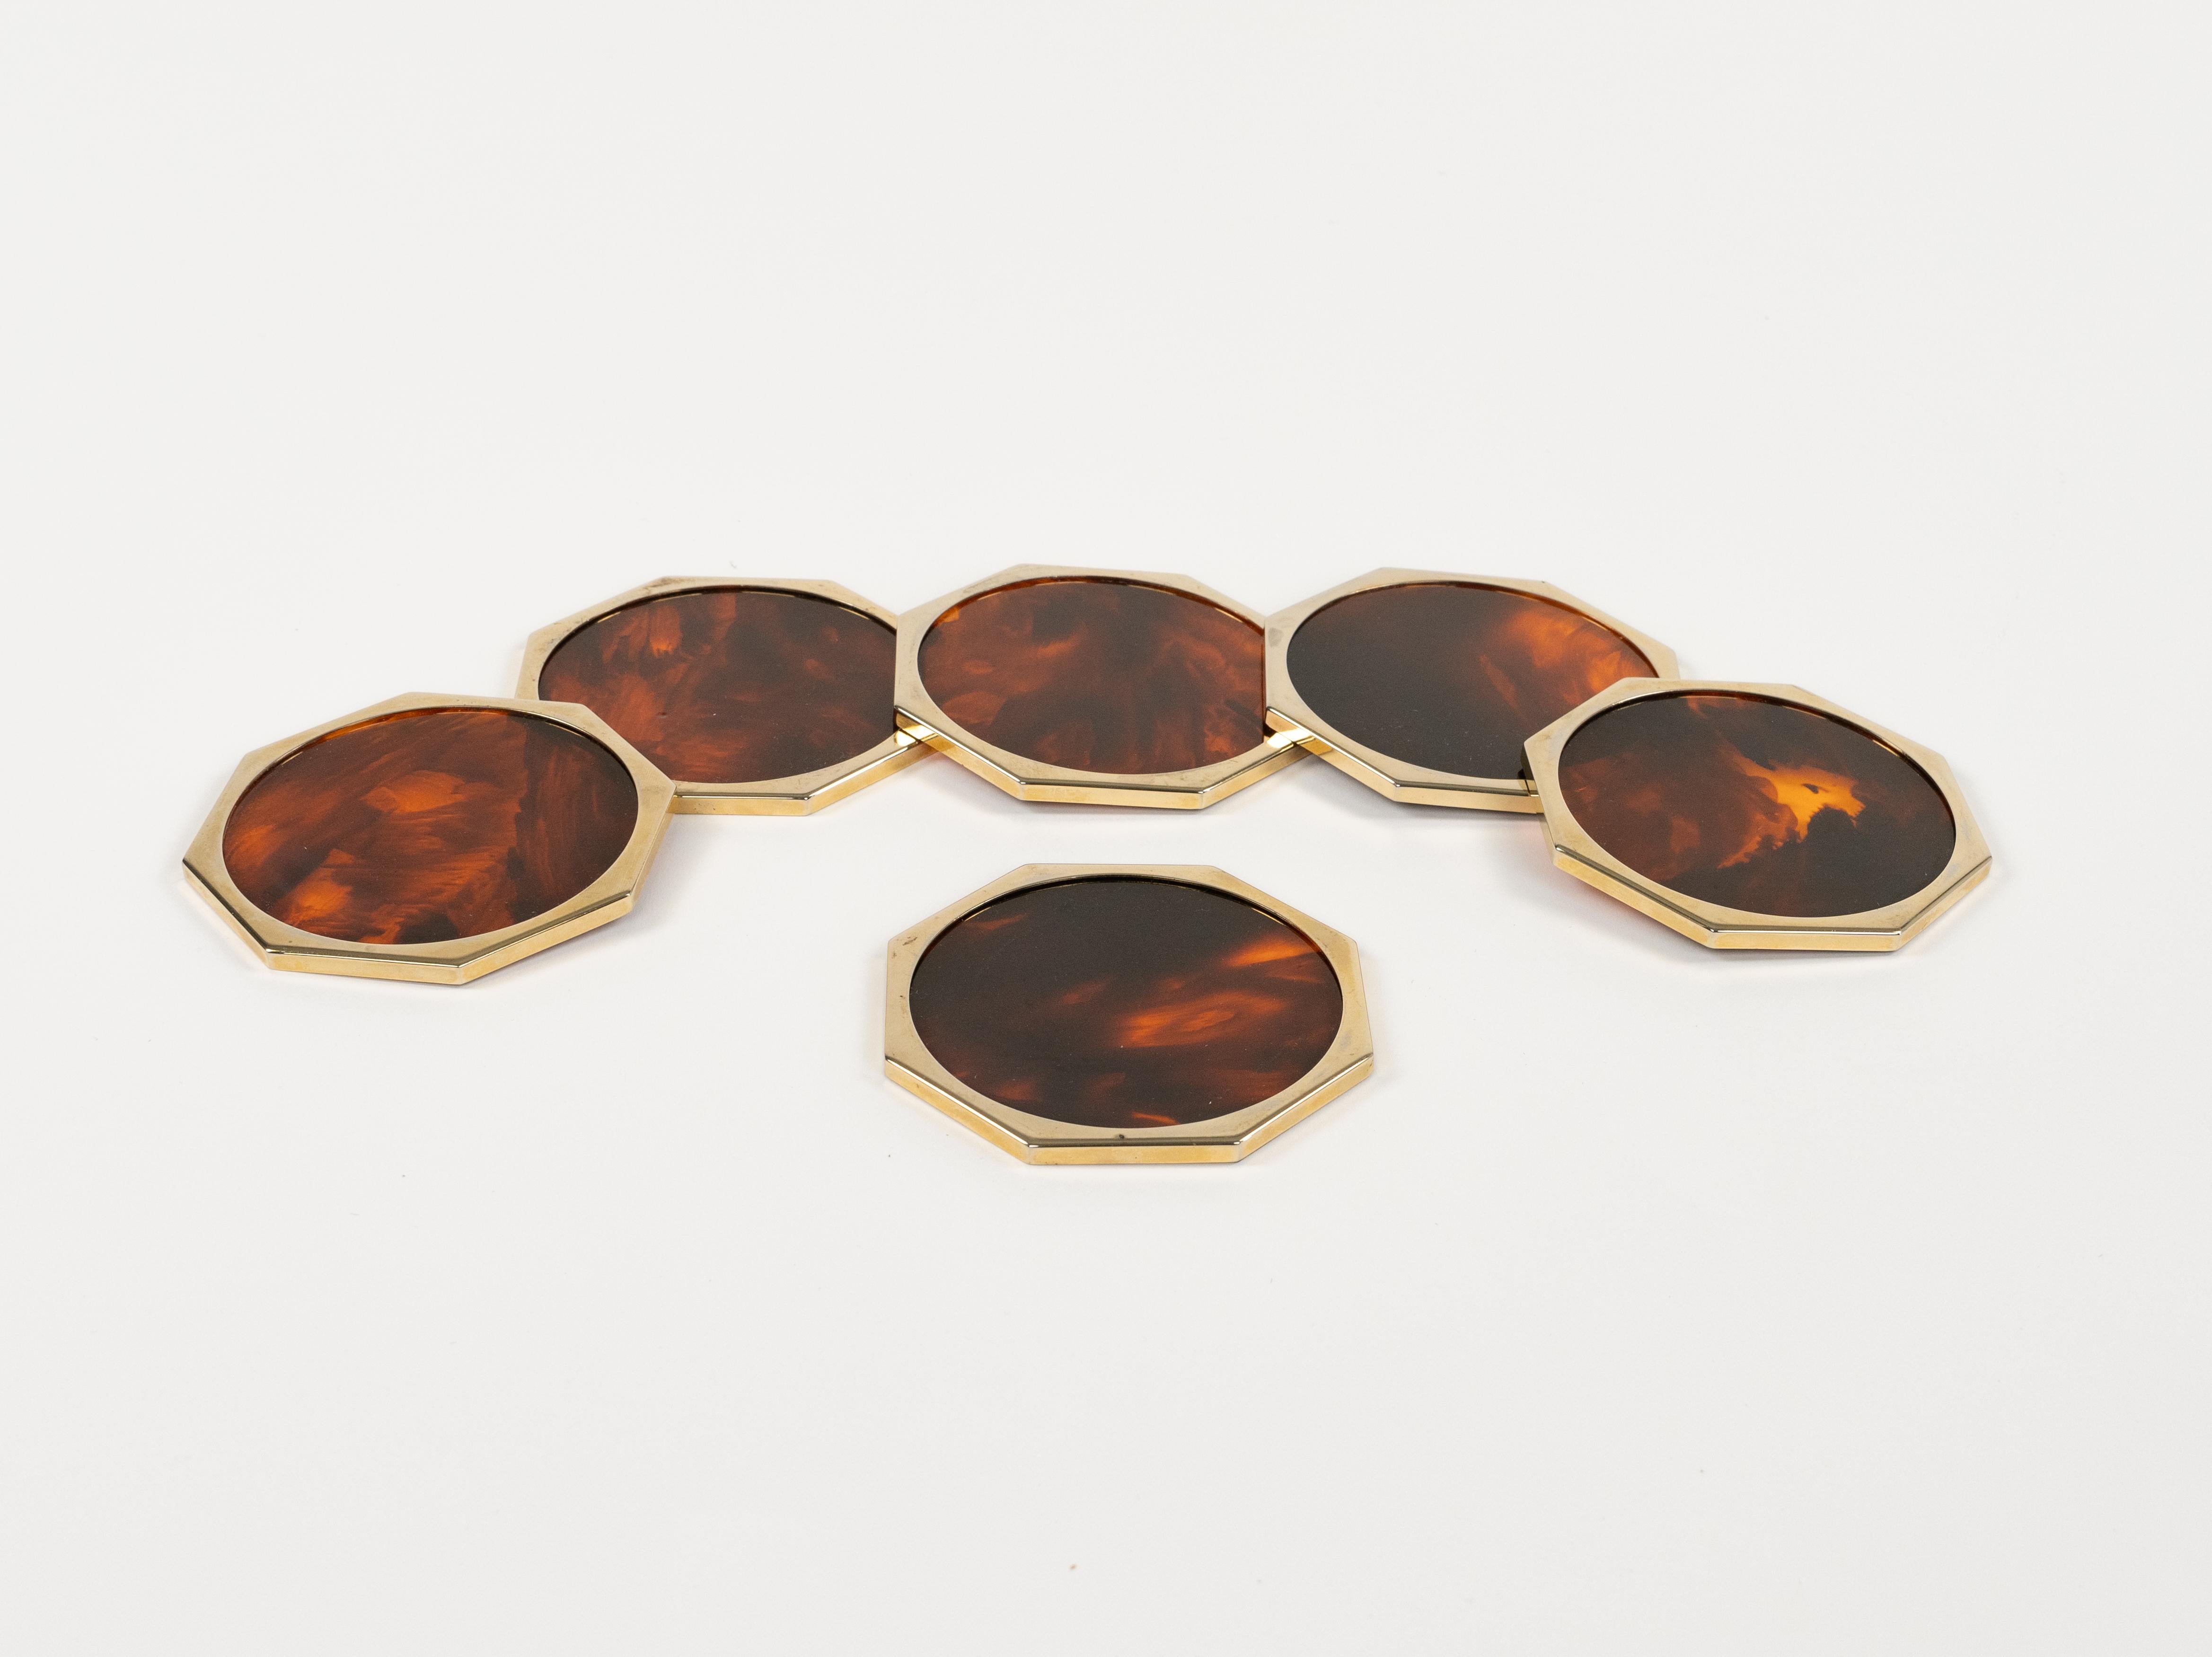 Beautiful set of six octagonal coasters in faux tortoiseshell lucite and brass borders in the style of Christian Dior.

Made in Italy 1970s.

